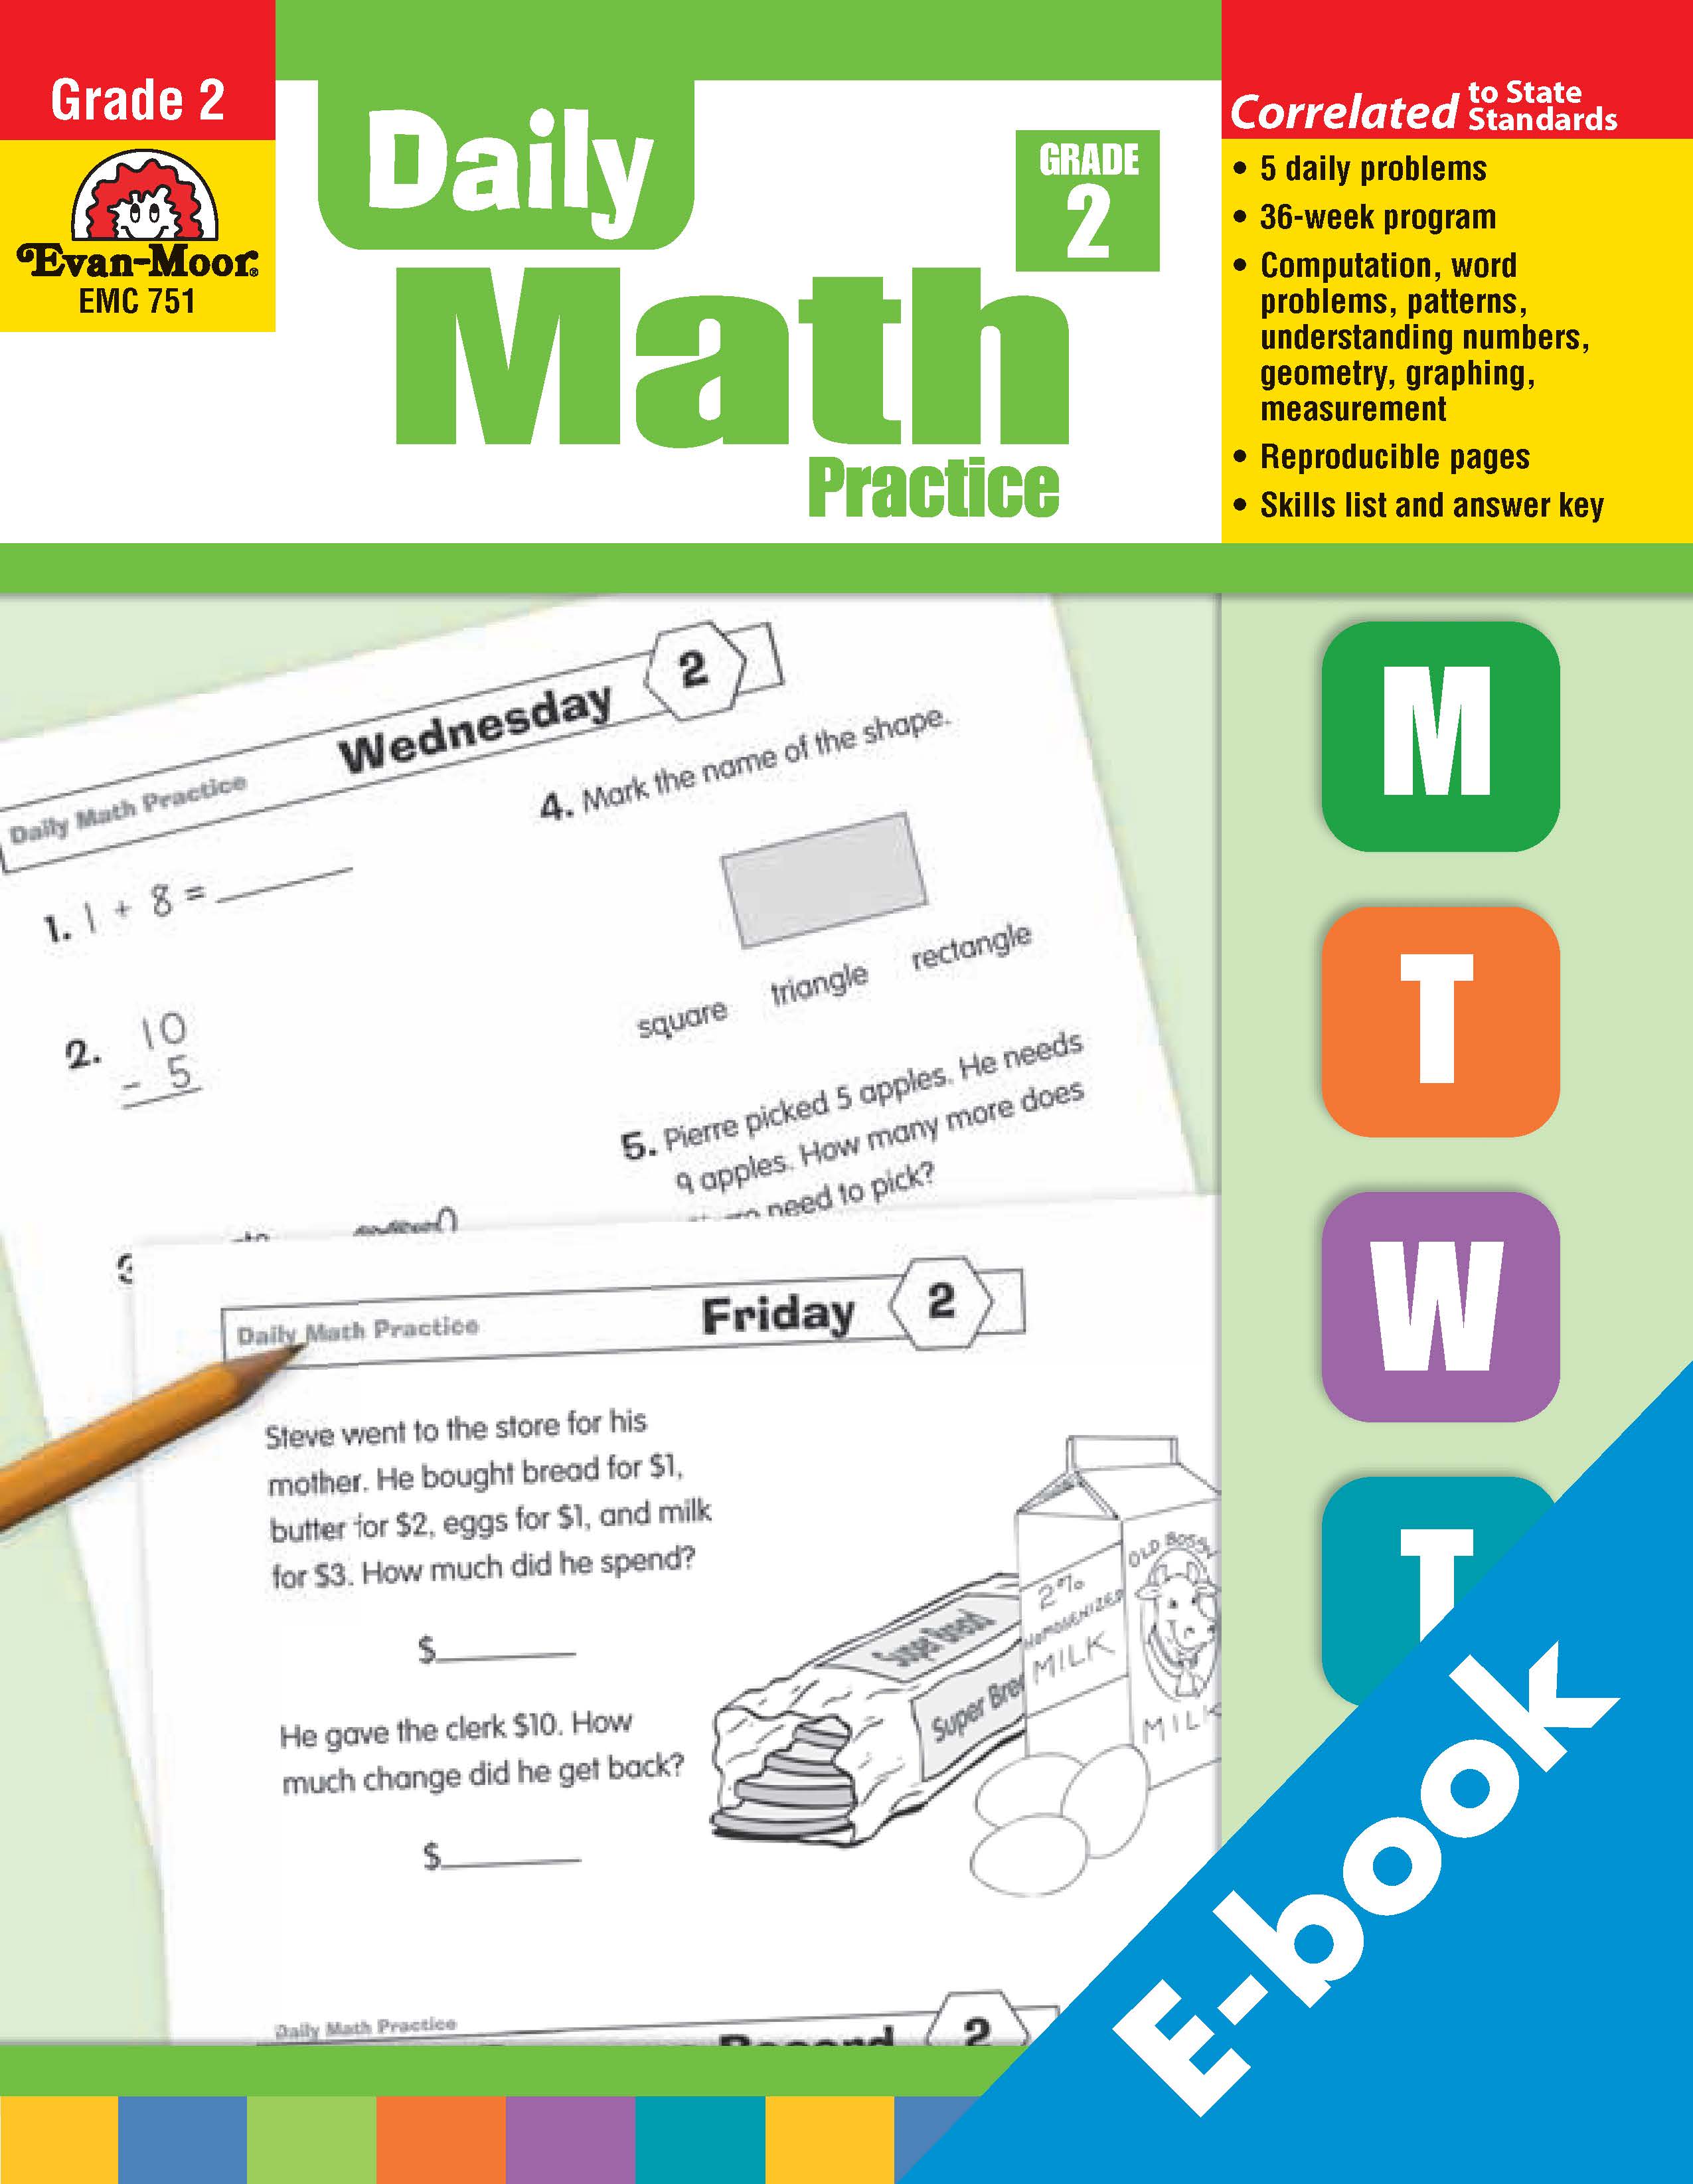 s-ch-daily-math-practice-grade-2-evan-moor-s-ch-g-y-xo-n-s-ch-ti-ng-anh-h-n-i